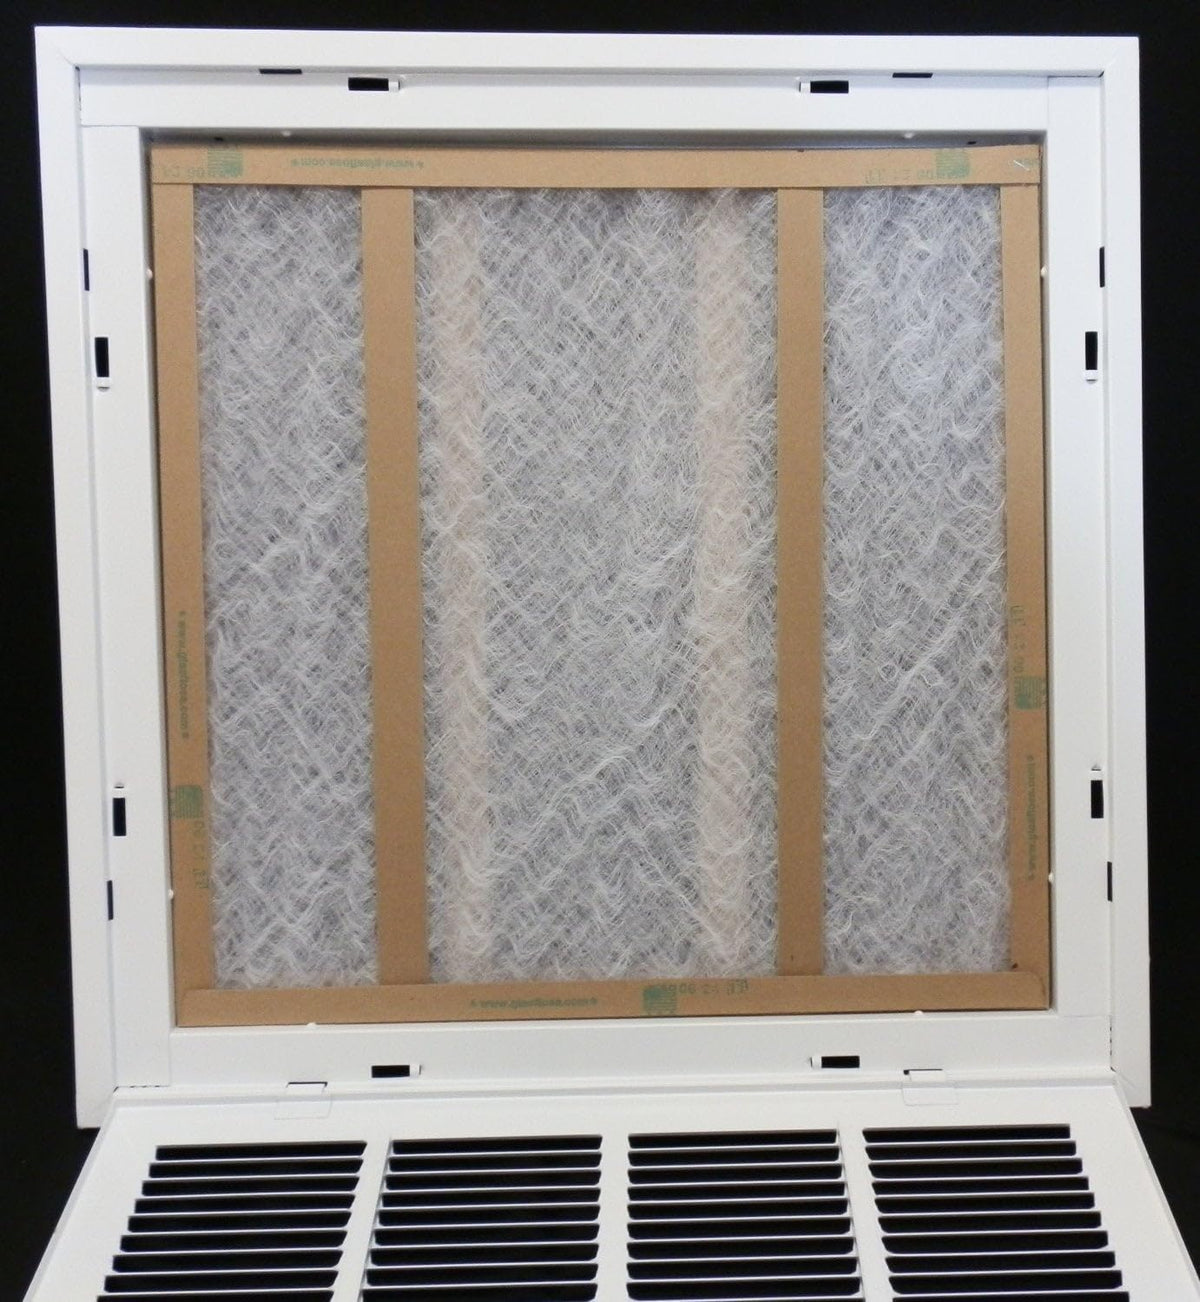 18&quot; X 32&quot; Steel Return Air Filter Grille for 1&quot; Filter - Removable Frame - [Outer Dimensions: 20 5/8&quot; X 34 5/8&quot;]